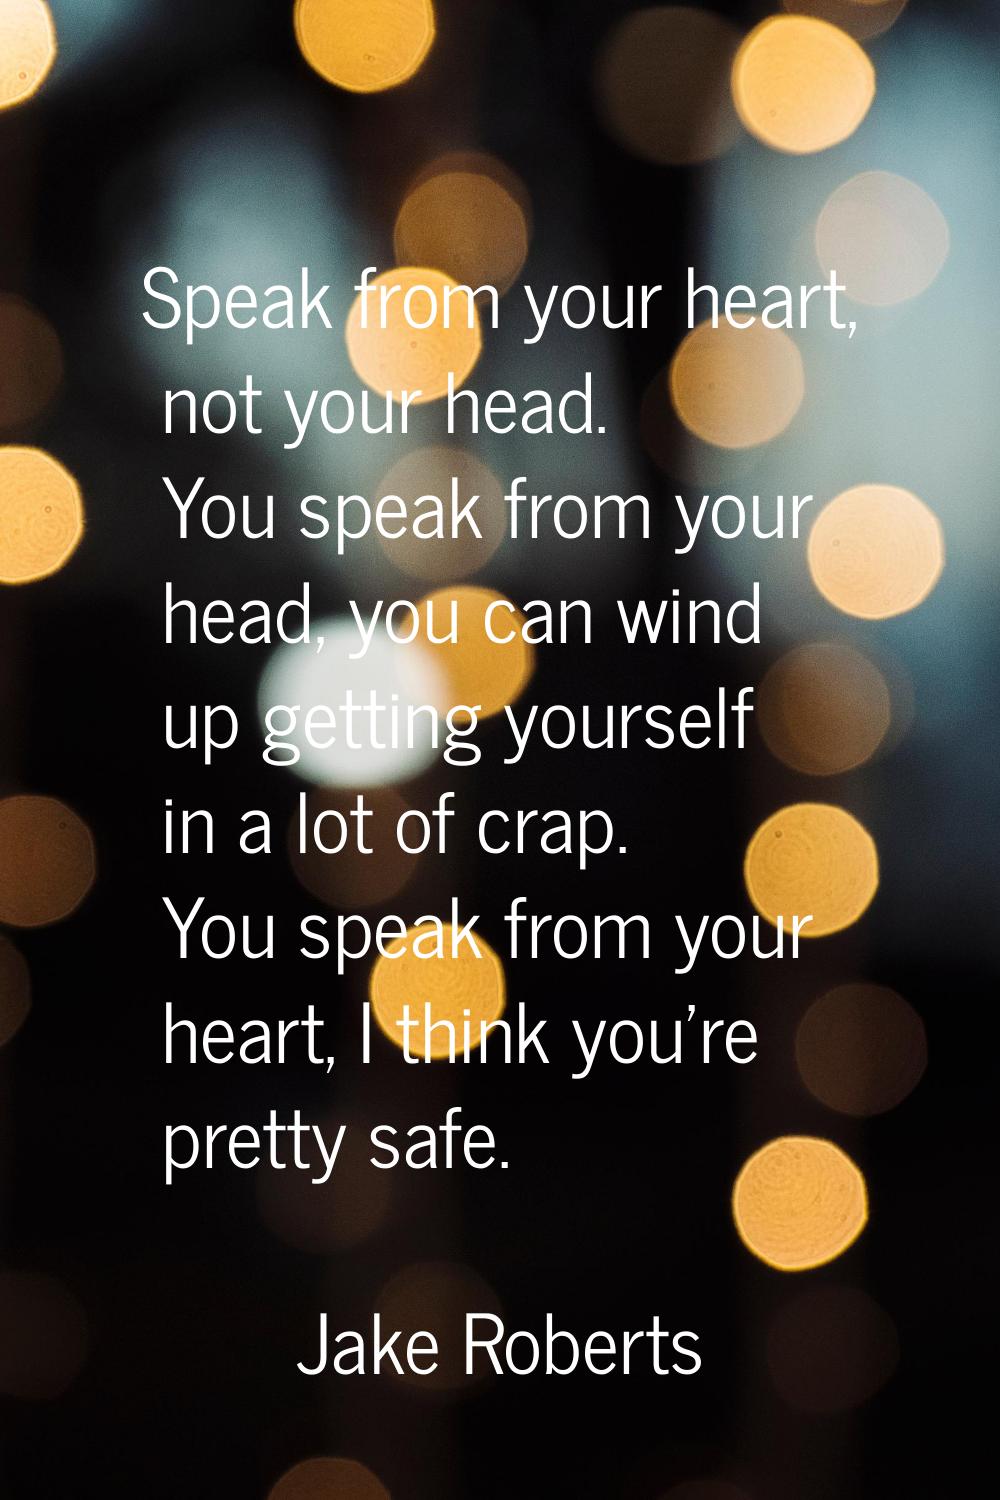 Speak from your heart, not your head. You speak from your head, you can wind up getting yourself in